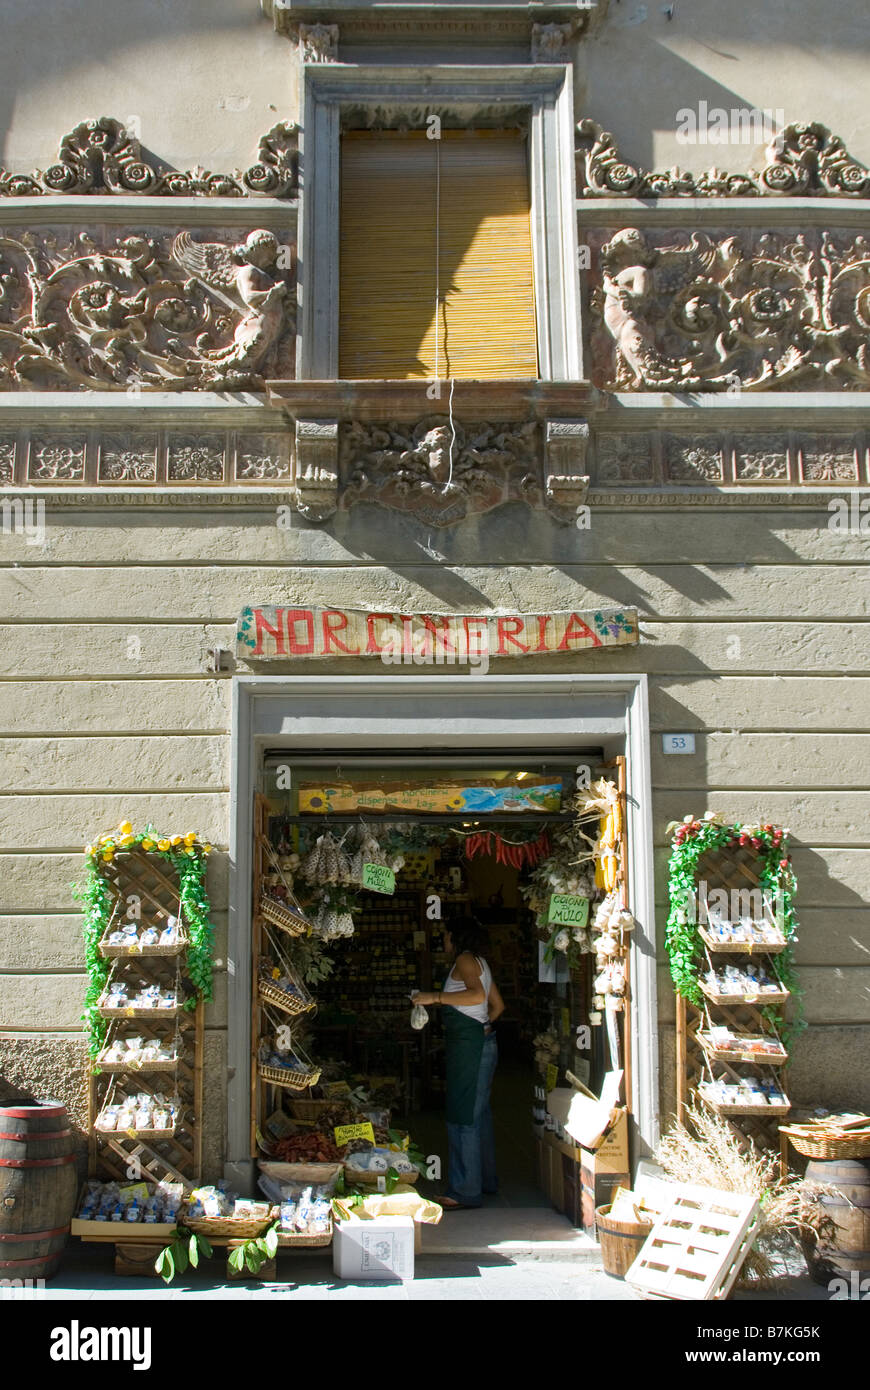 Umbrian produce store in a lavishly decorated building with terracotta embellishments of angels and cupids Stock Photo